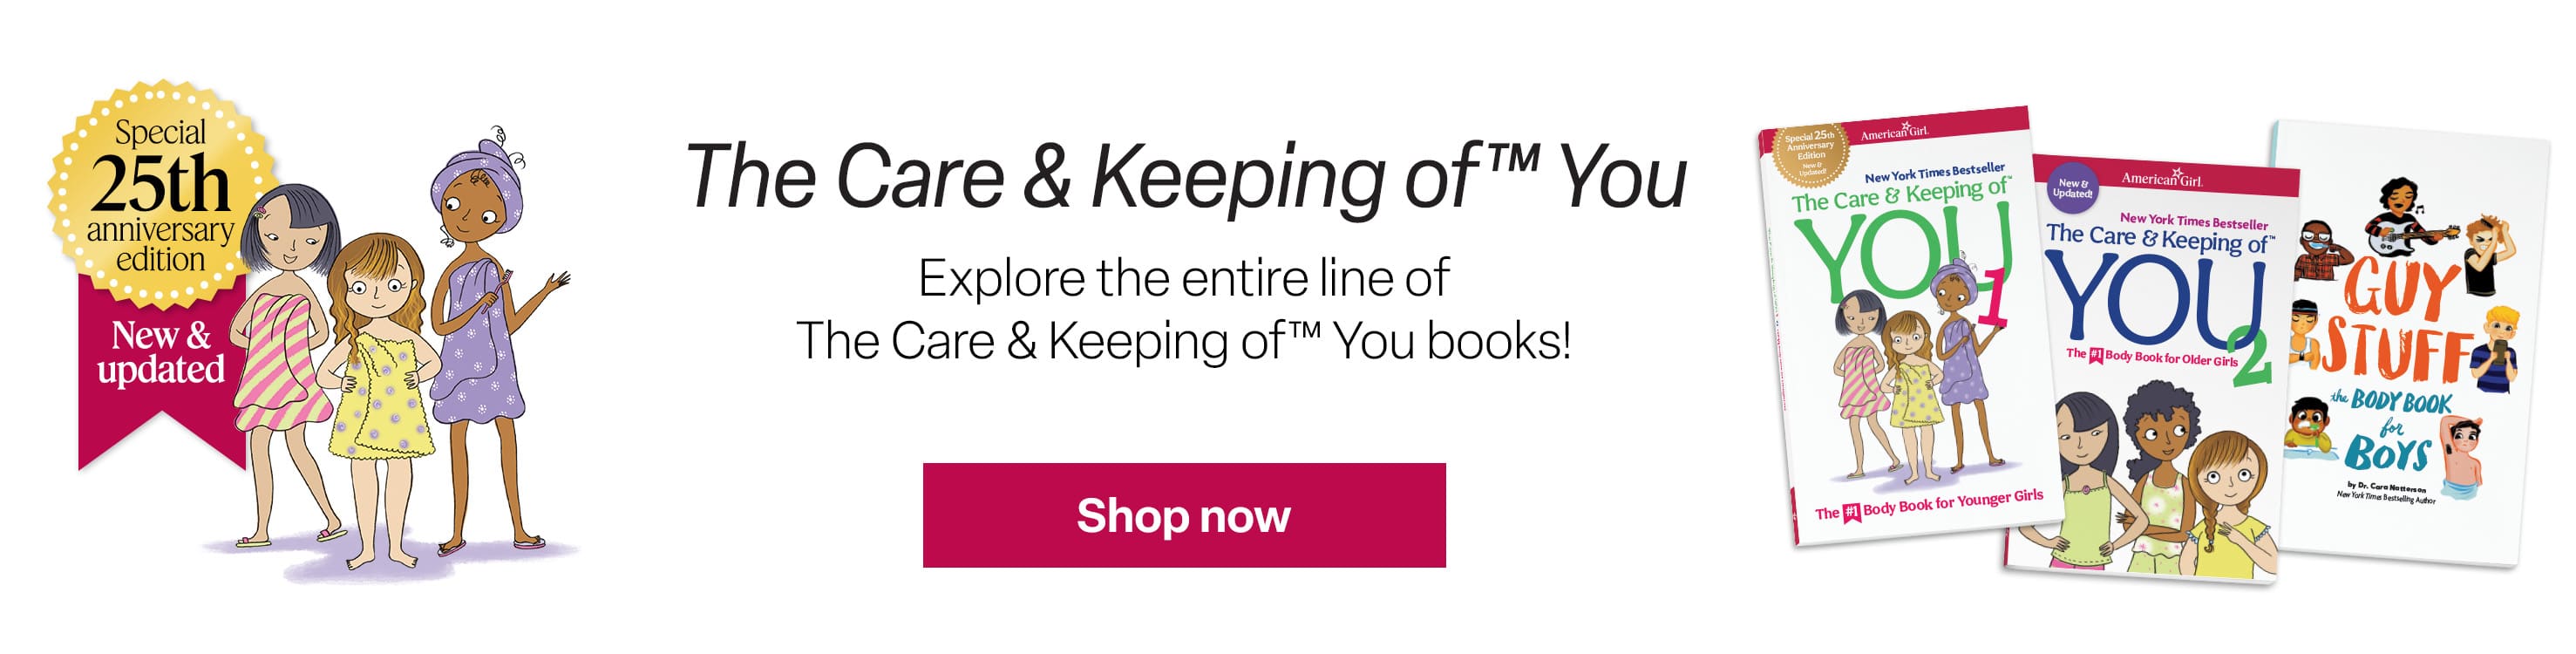 Banner advertising the Care and Keeping of You books